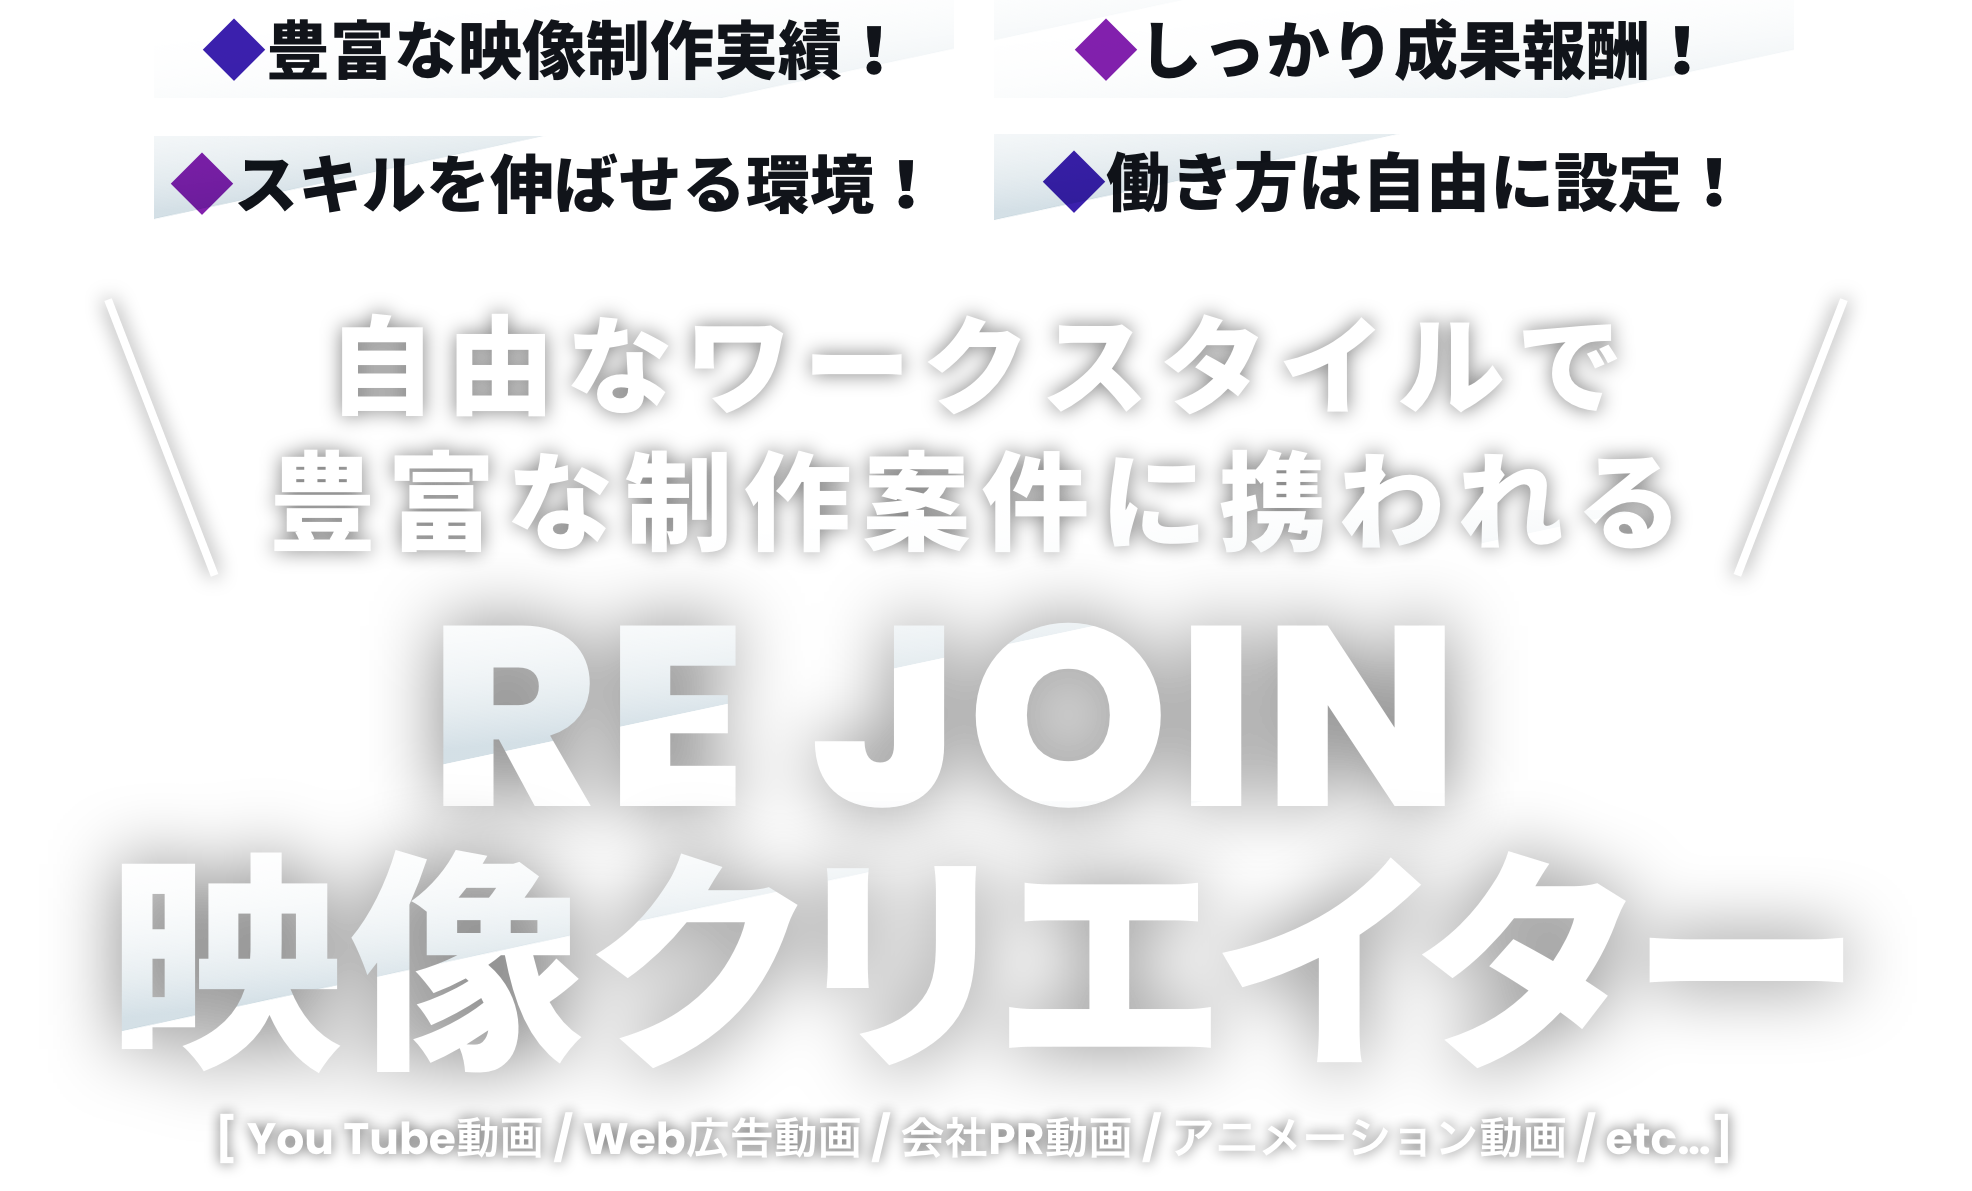 RE JOIN 映像クリエイター